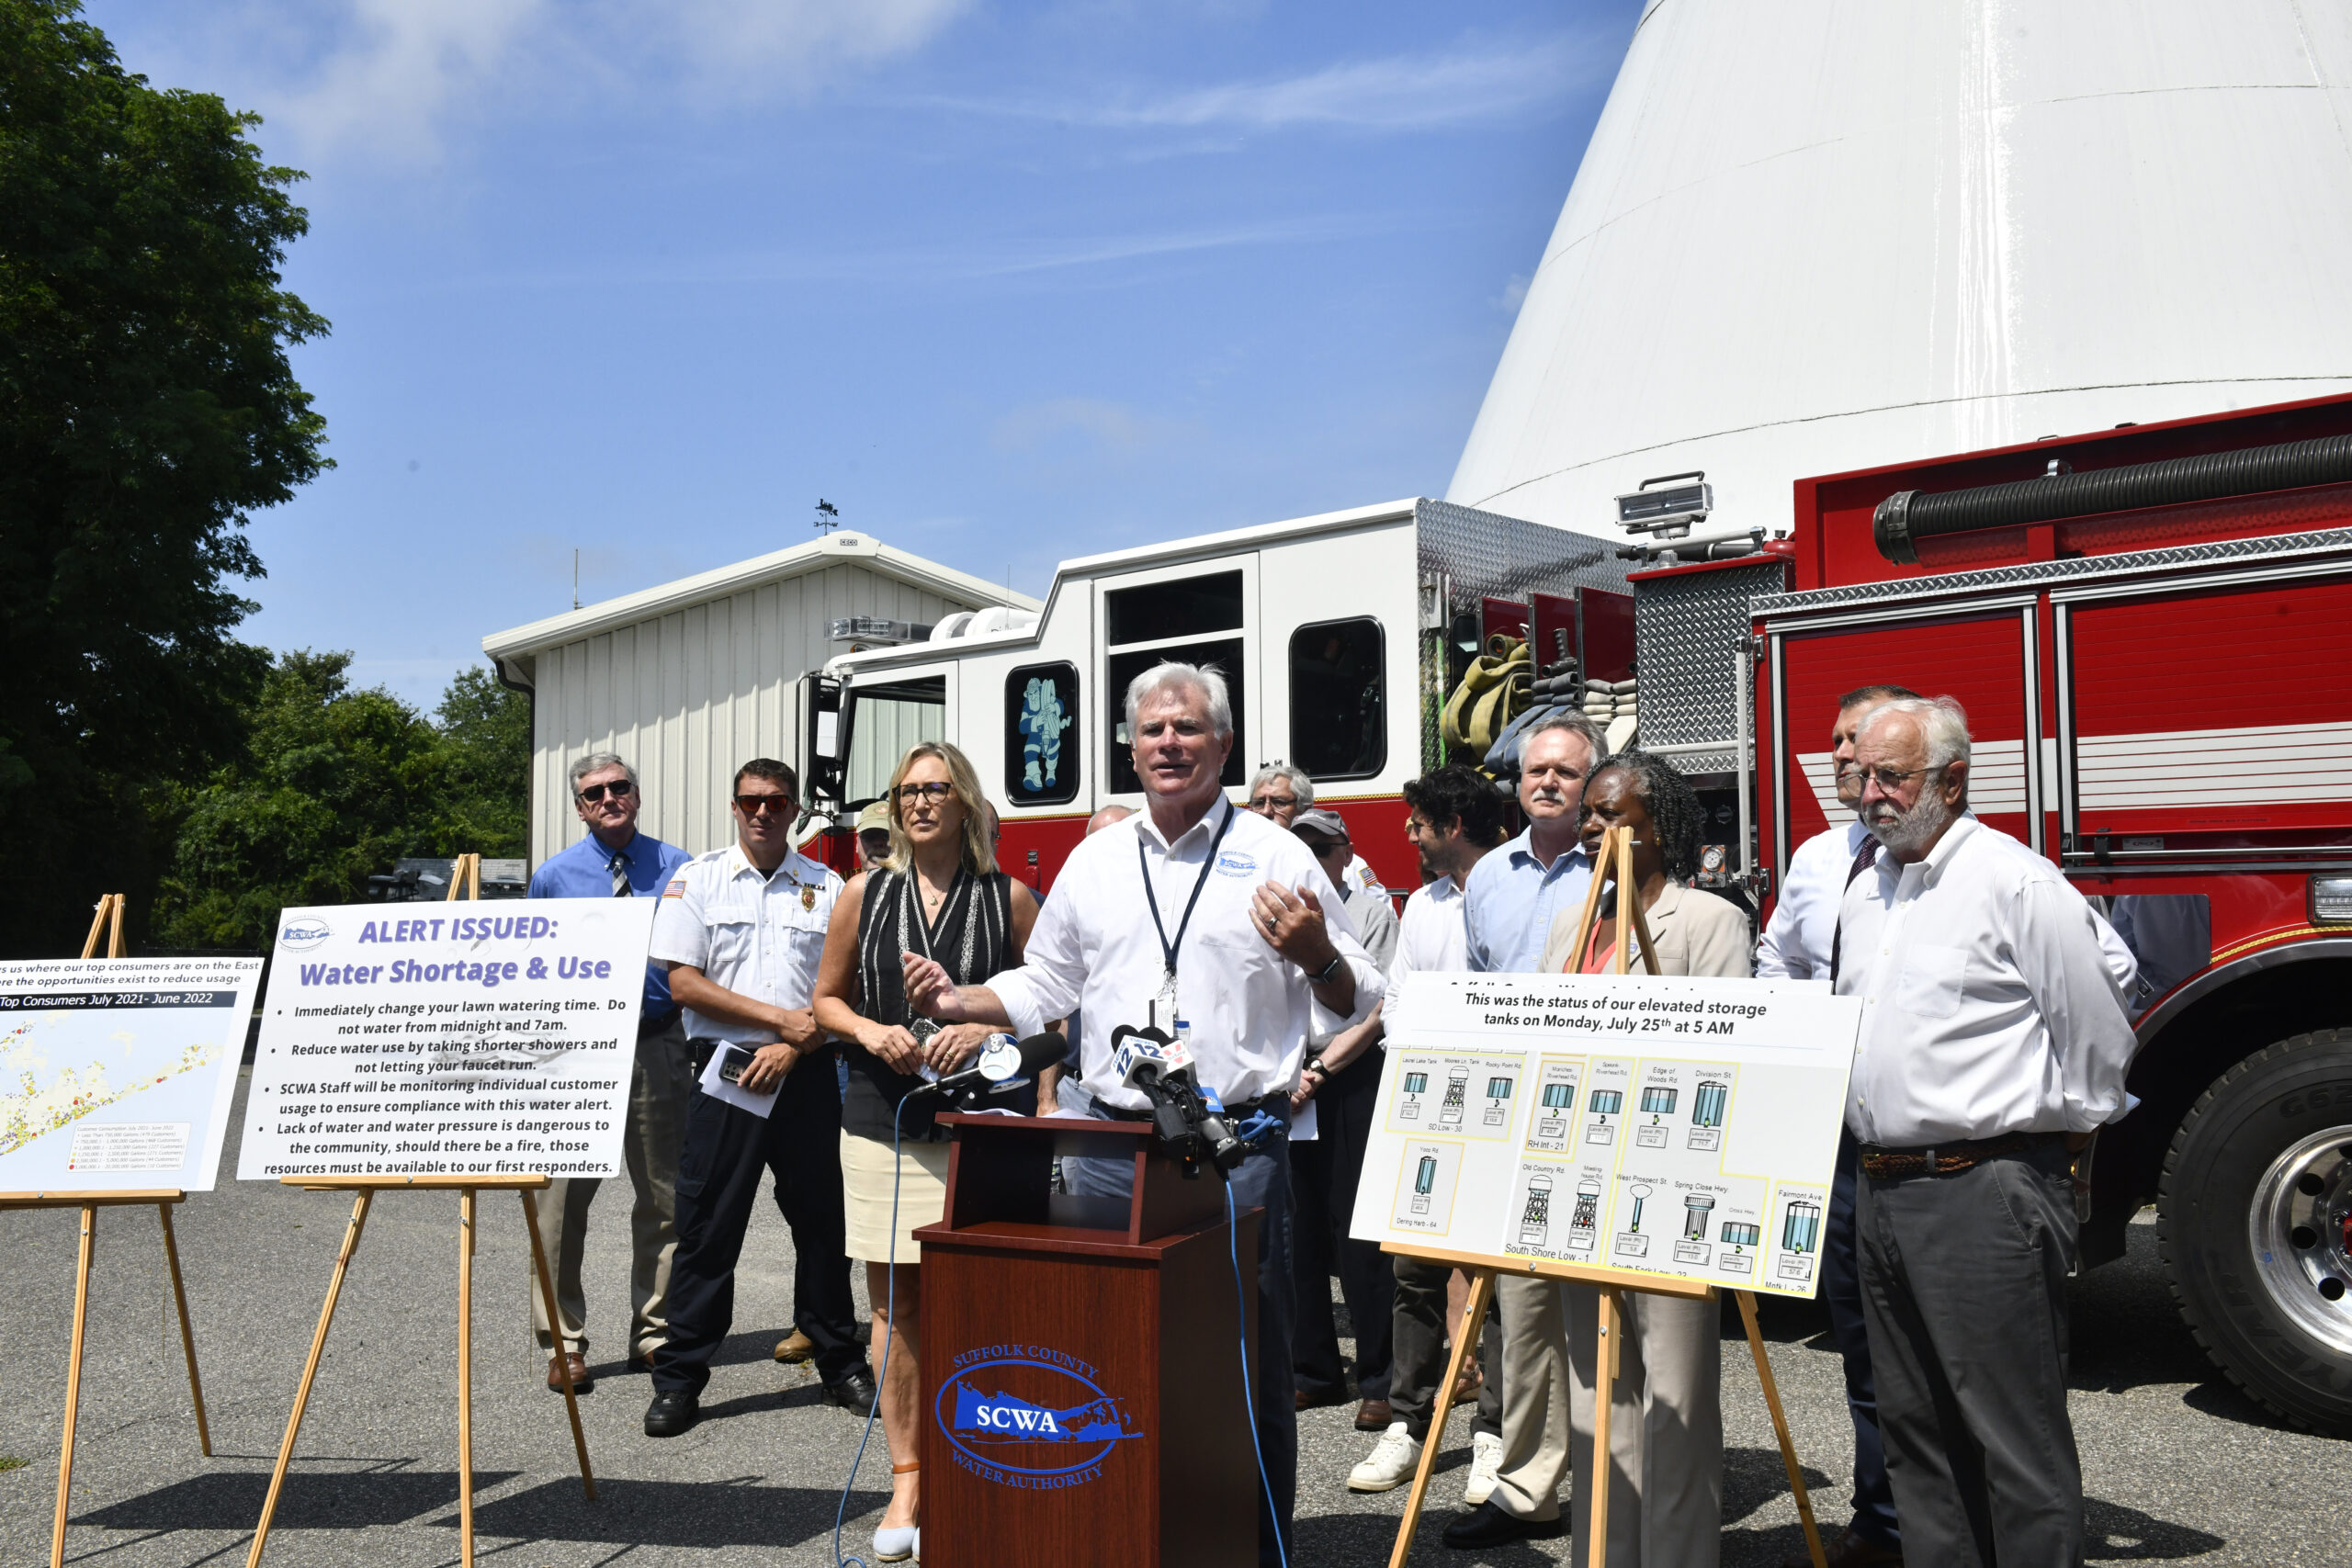 Pat Halpin, chairman of the Suffolk County Water Authority Speaks at a press conference on Tuesday in Southampton.  DANA SHAW